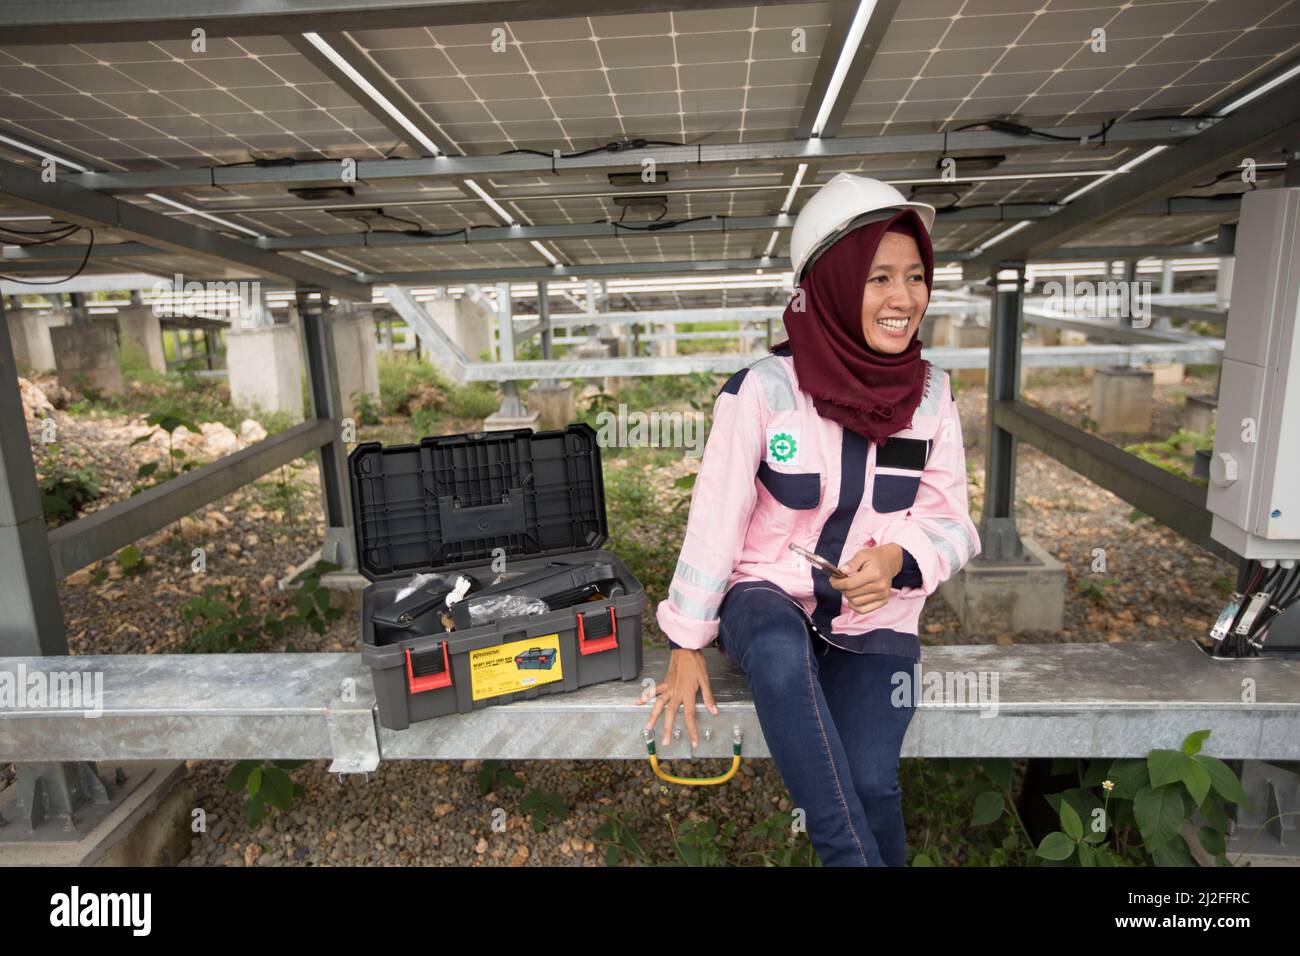 Junior electrical technician, Verawati (23), inspects and maintains solar panels on Karampuang Island, Indonesia, which were installed as part of the Stock Photo